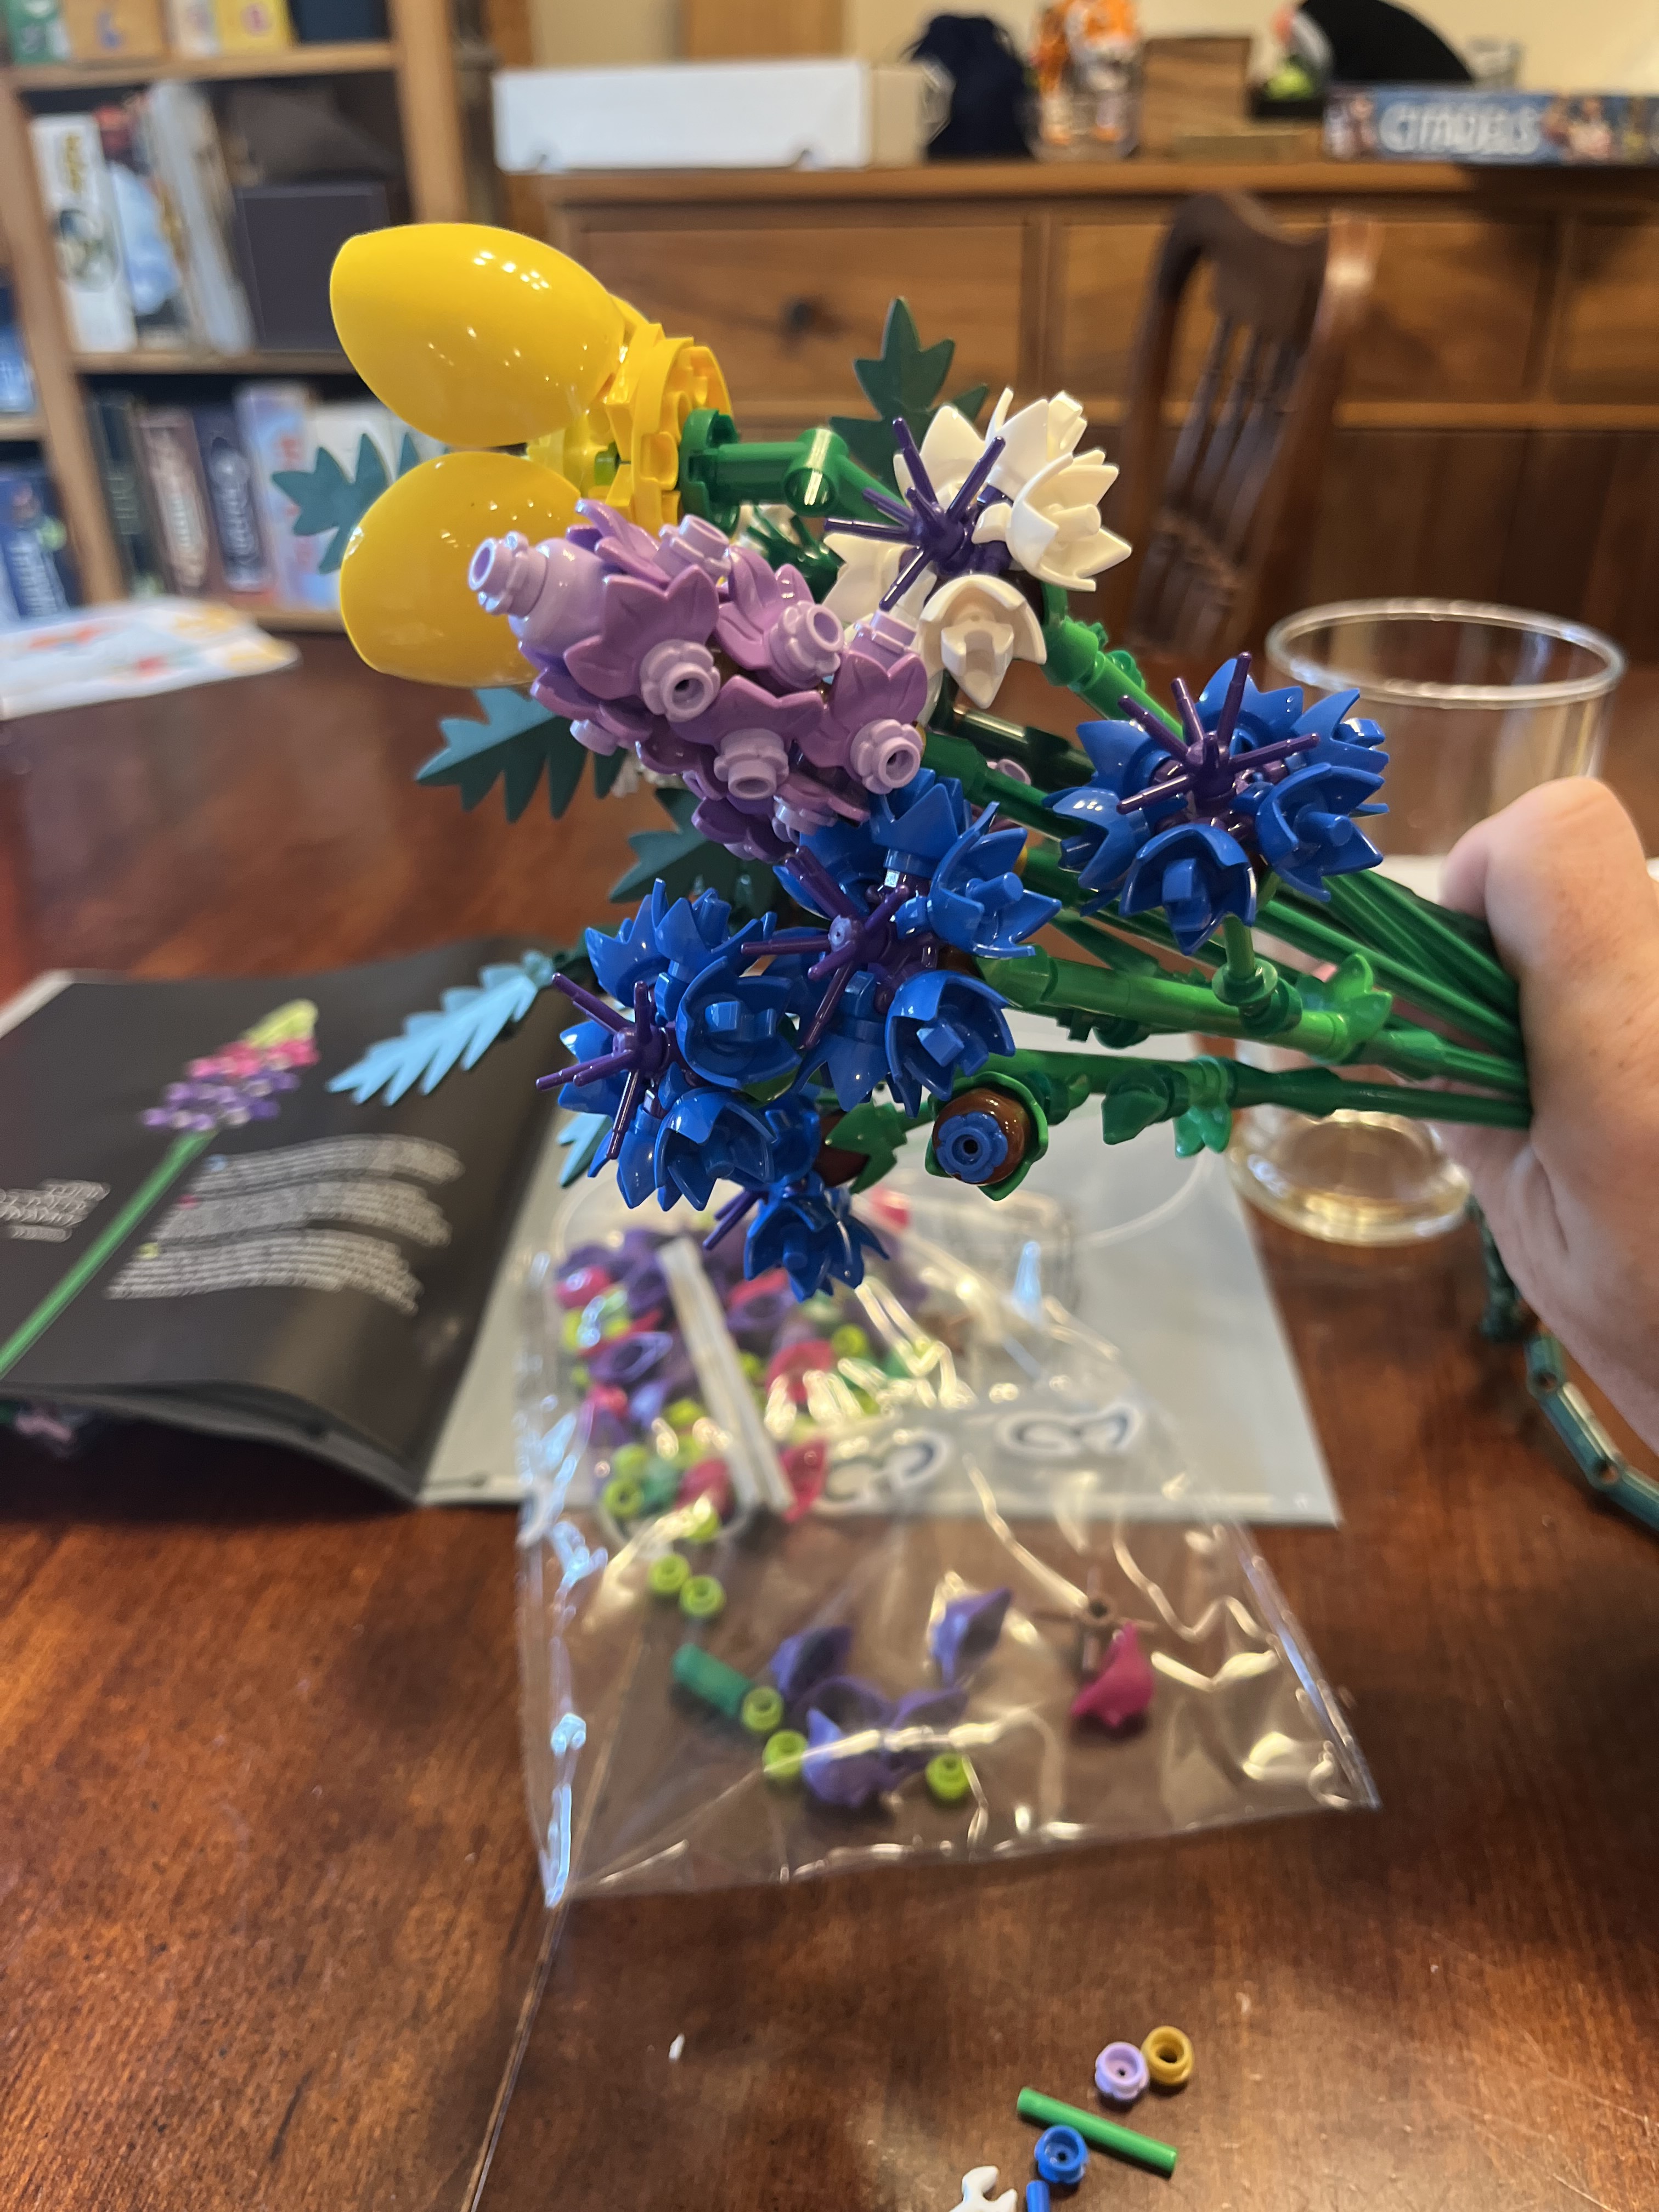 In the foreground is a collection of colorful Legos constructed into wildflowers. A hand on the right is holding the bunch of flowers. In the background is a dining table and the Lego instruction book